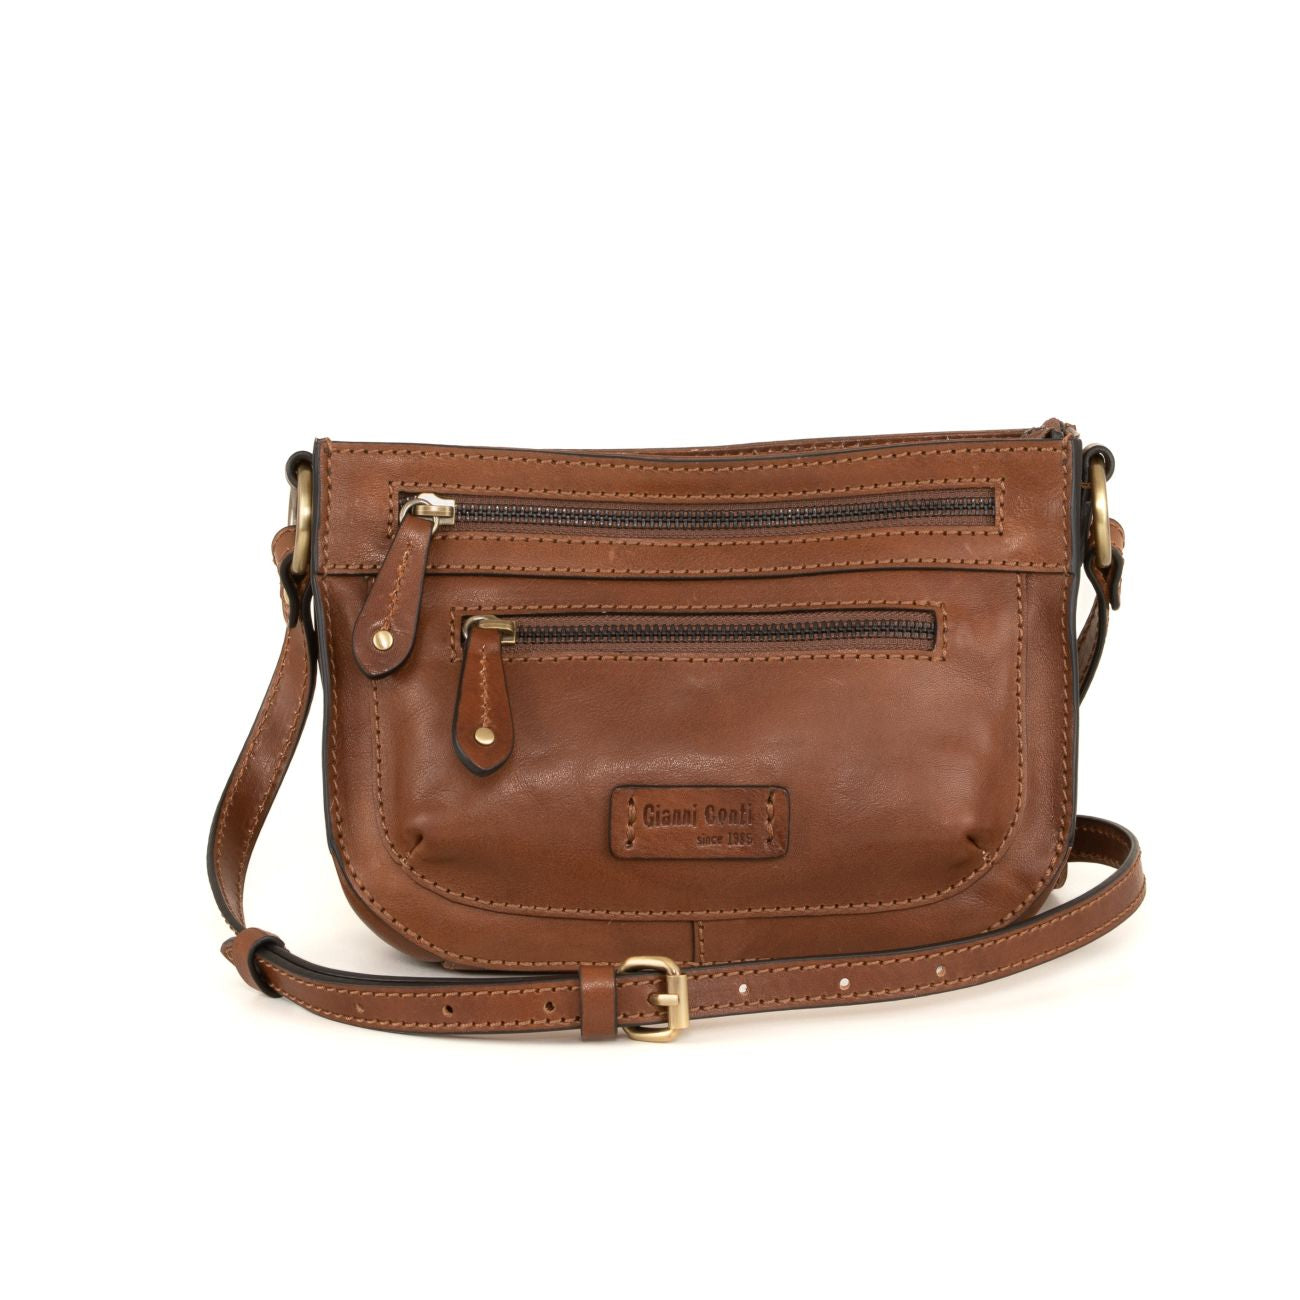 Brown leather crossbody bag with multiple zipper pockets and adjustable strap